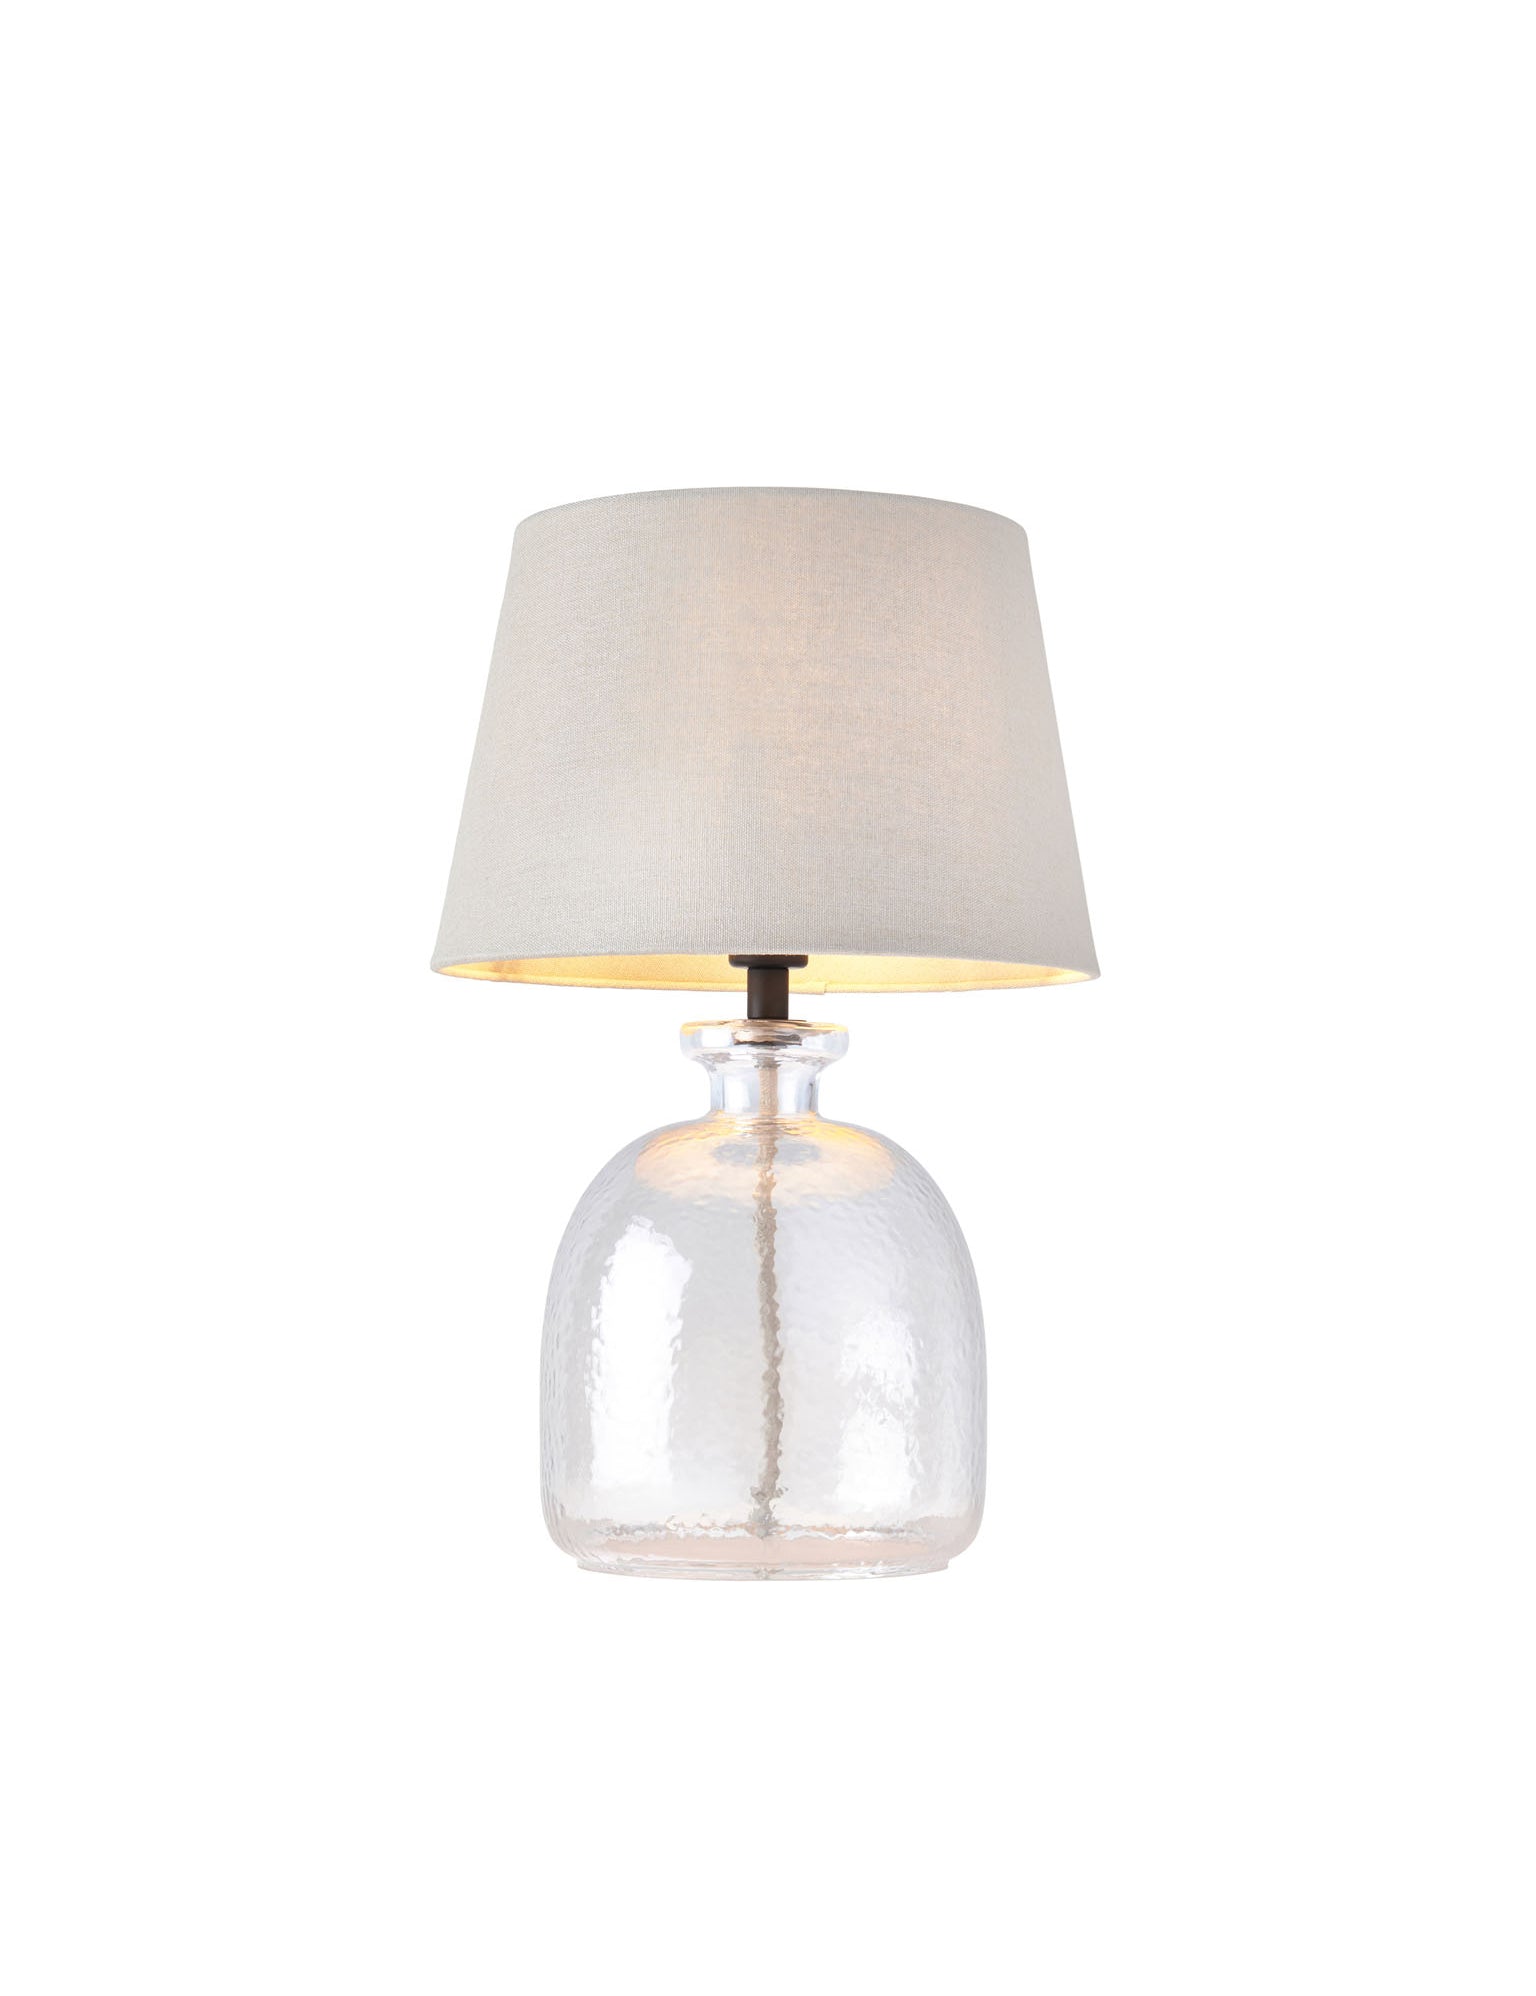 Lyla glass table lamp with metal details